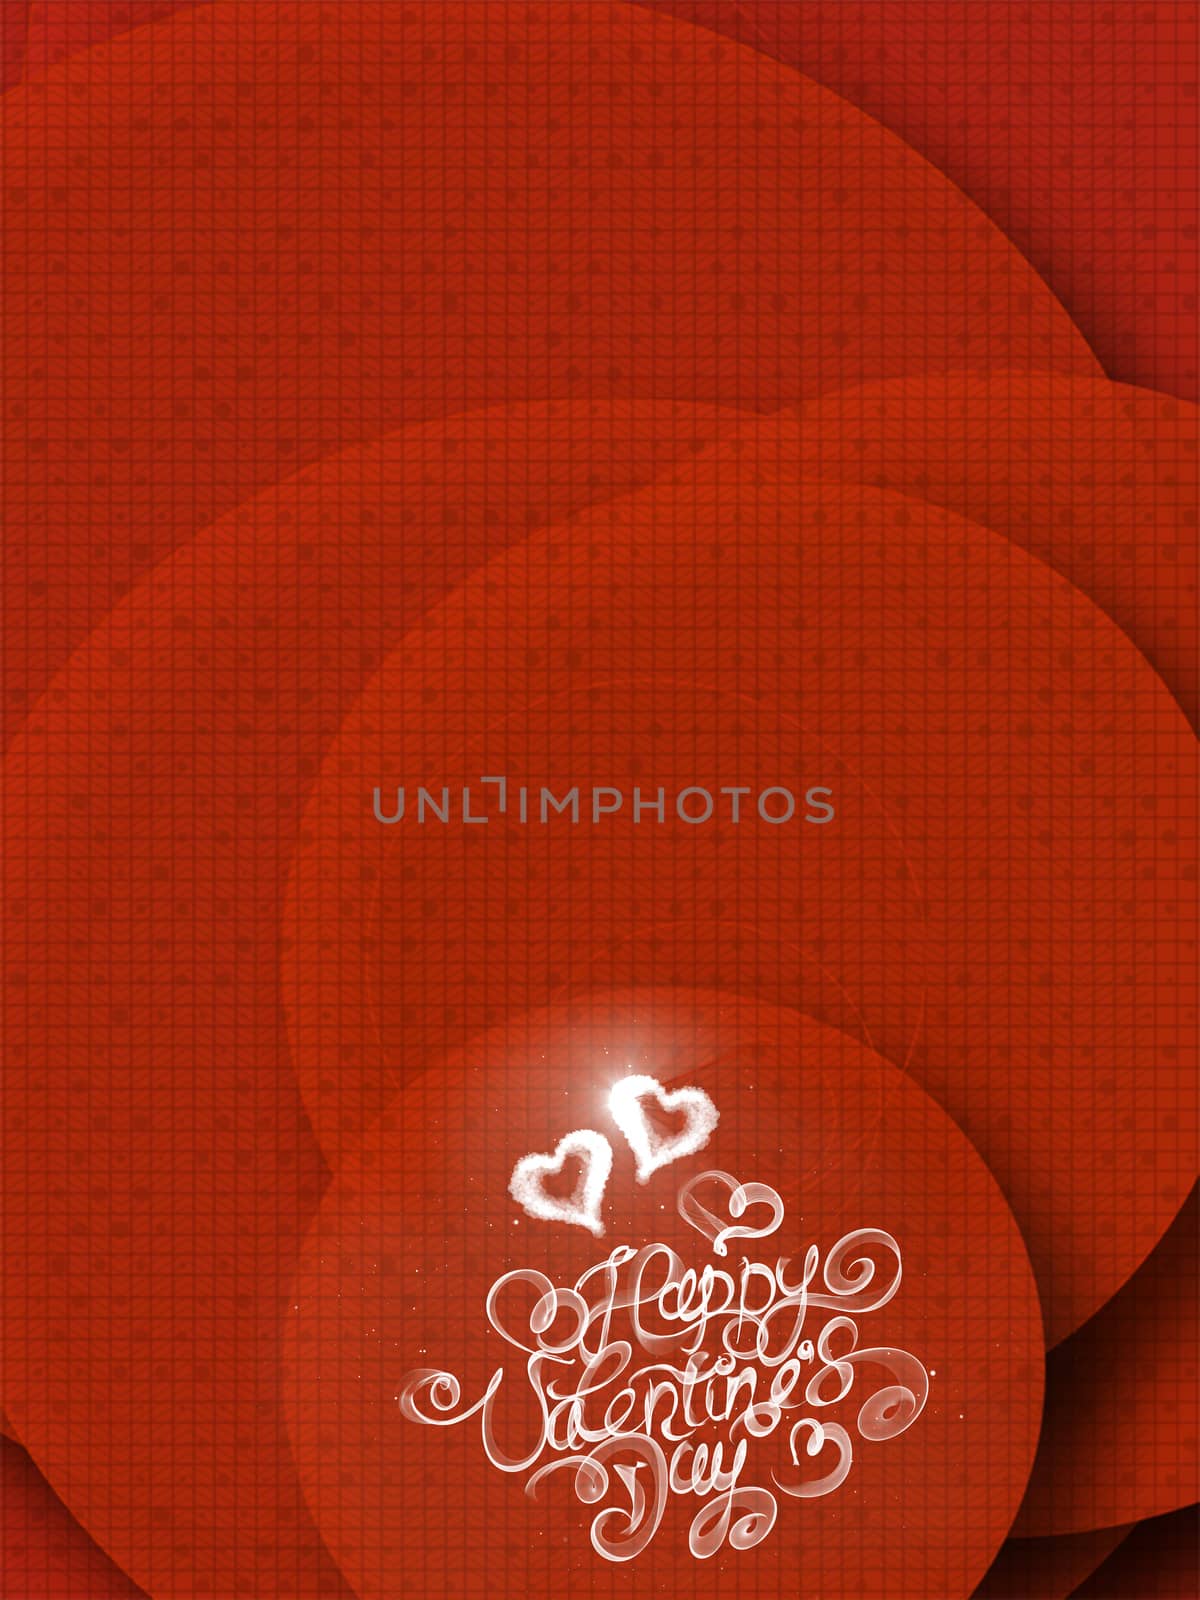 Happy Valentines day vintage lettering written by fire or smoke over red abstract background full of circles.